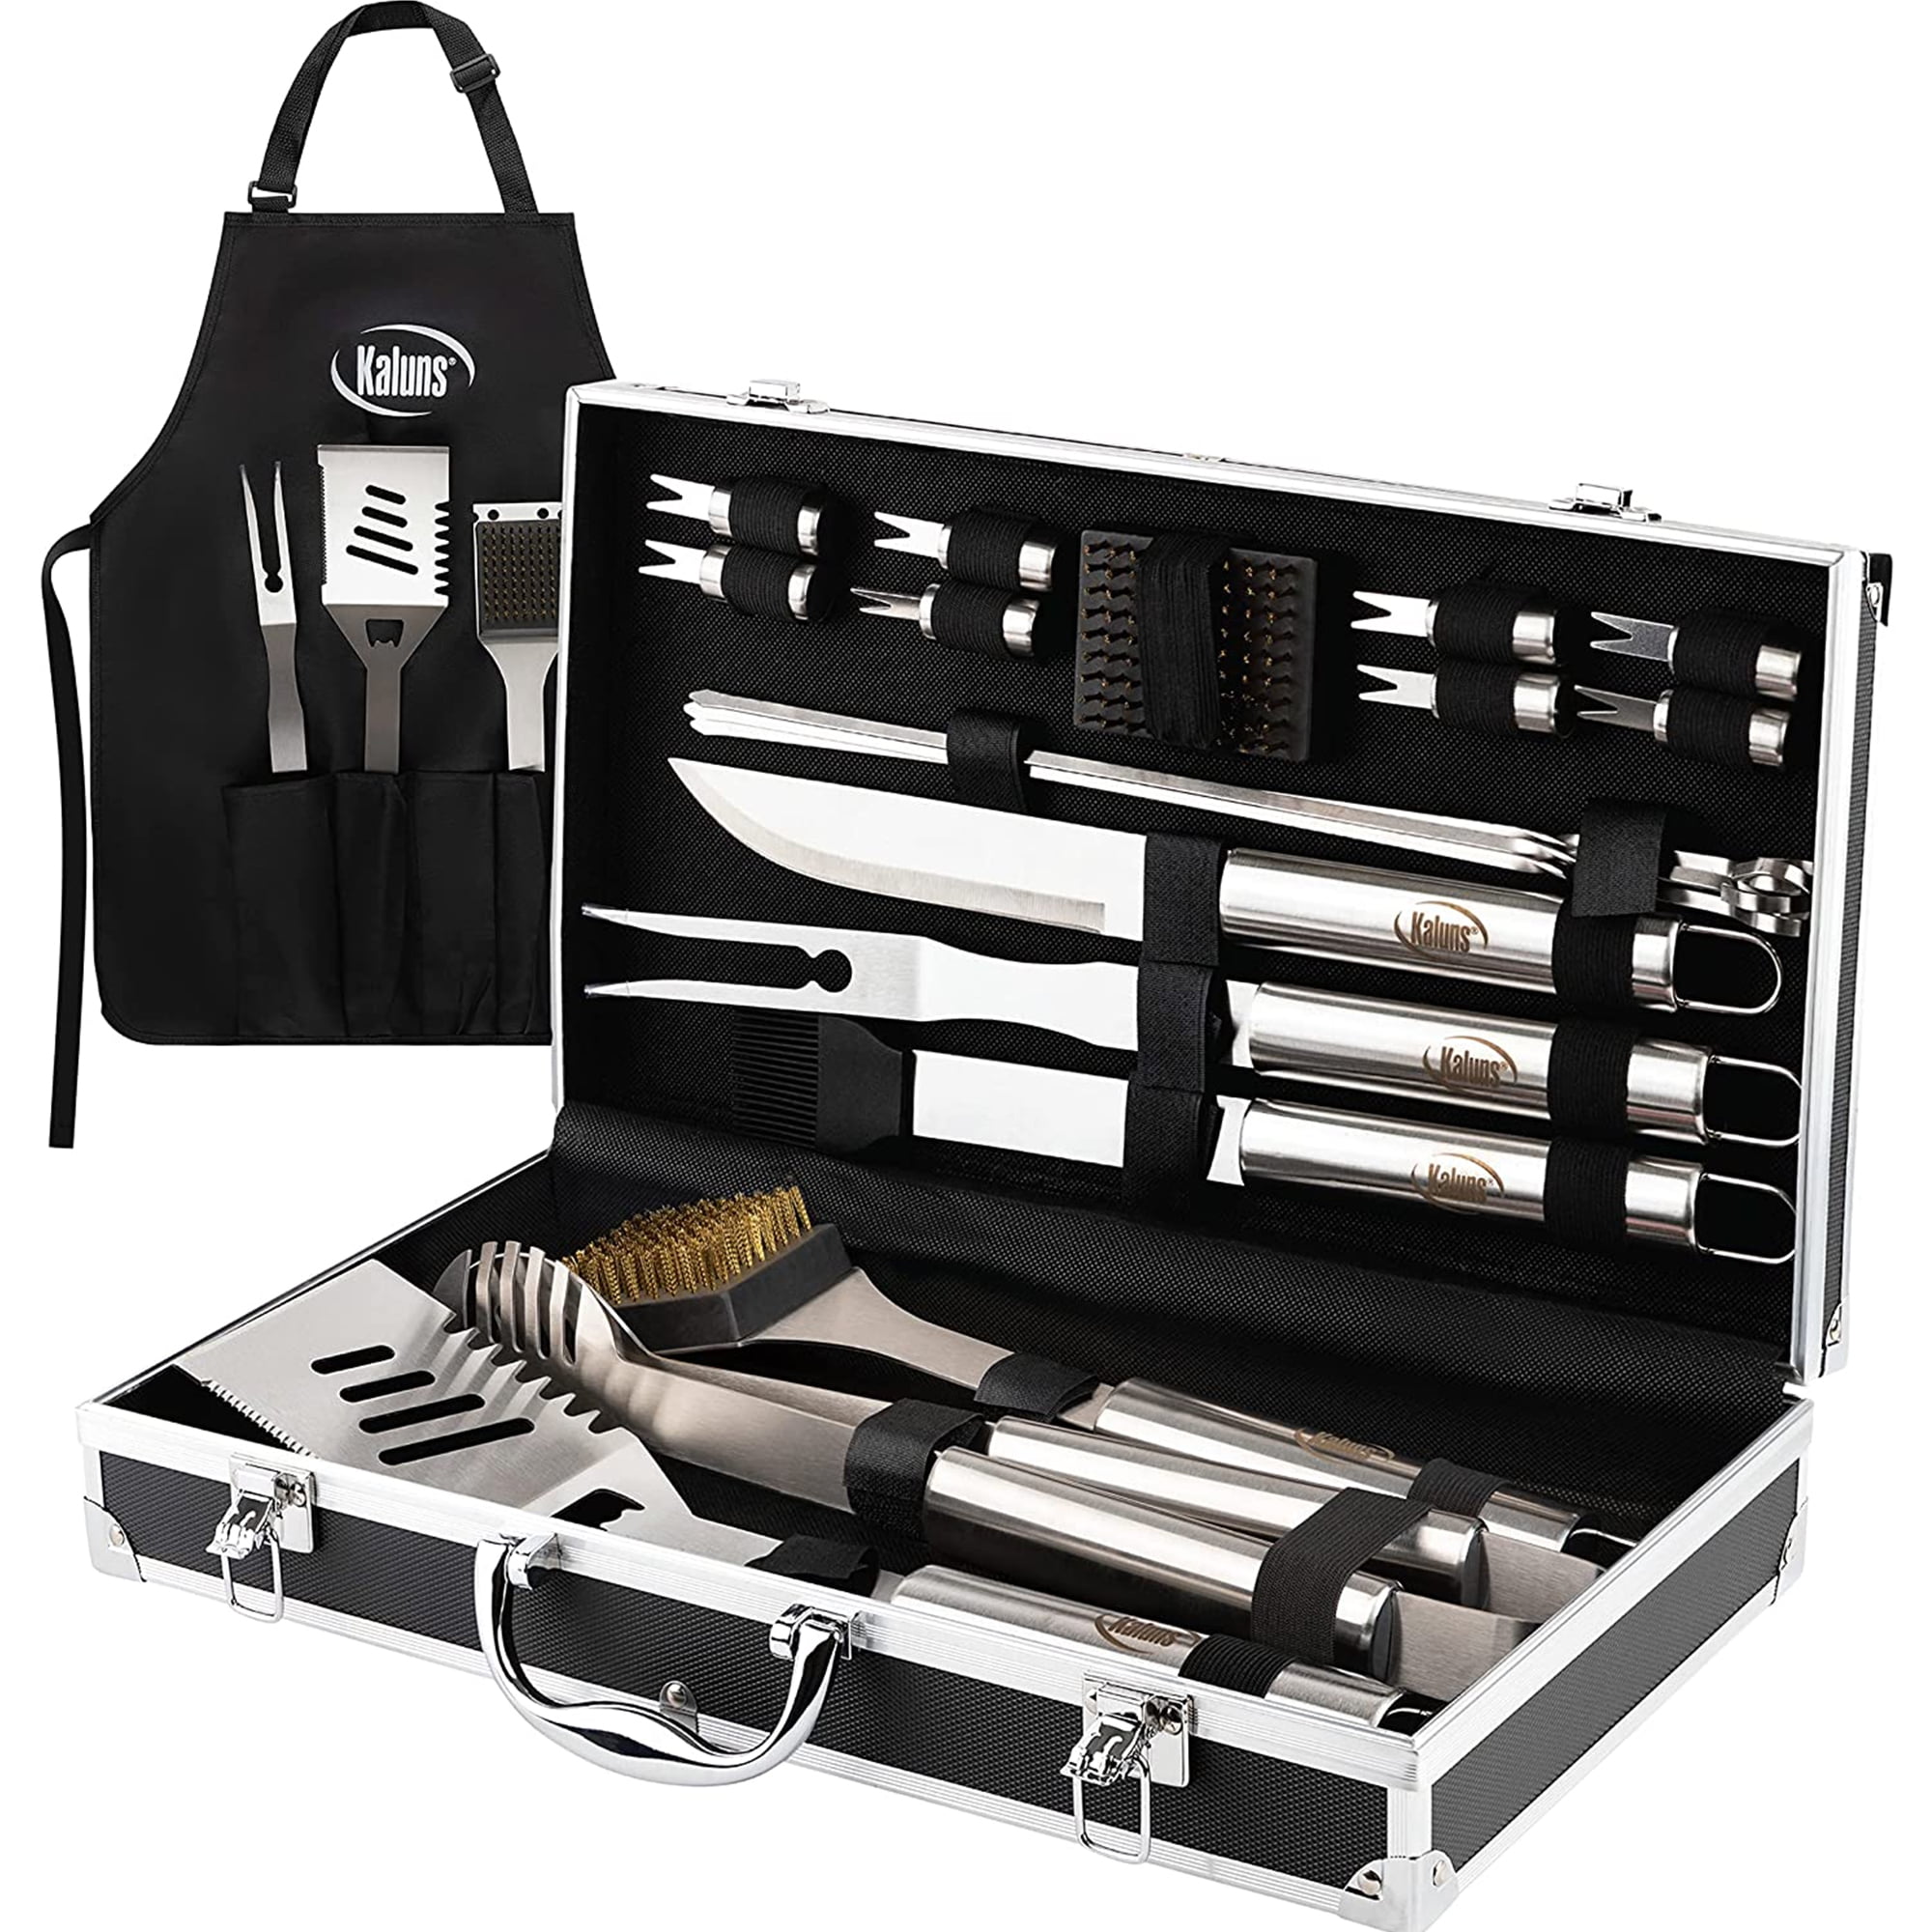 Grill Utensils Set,BBQ Grilling Accessories, Grill Set Gifts for Men Grill  Tools, MUJUZE Barbeque with Apron, Stainless Steel Grill Kit Set Gifts for